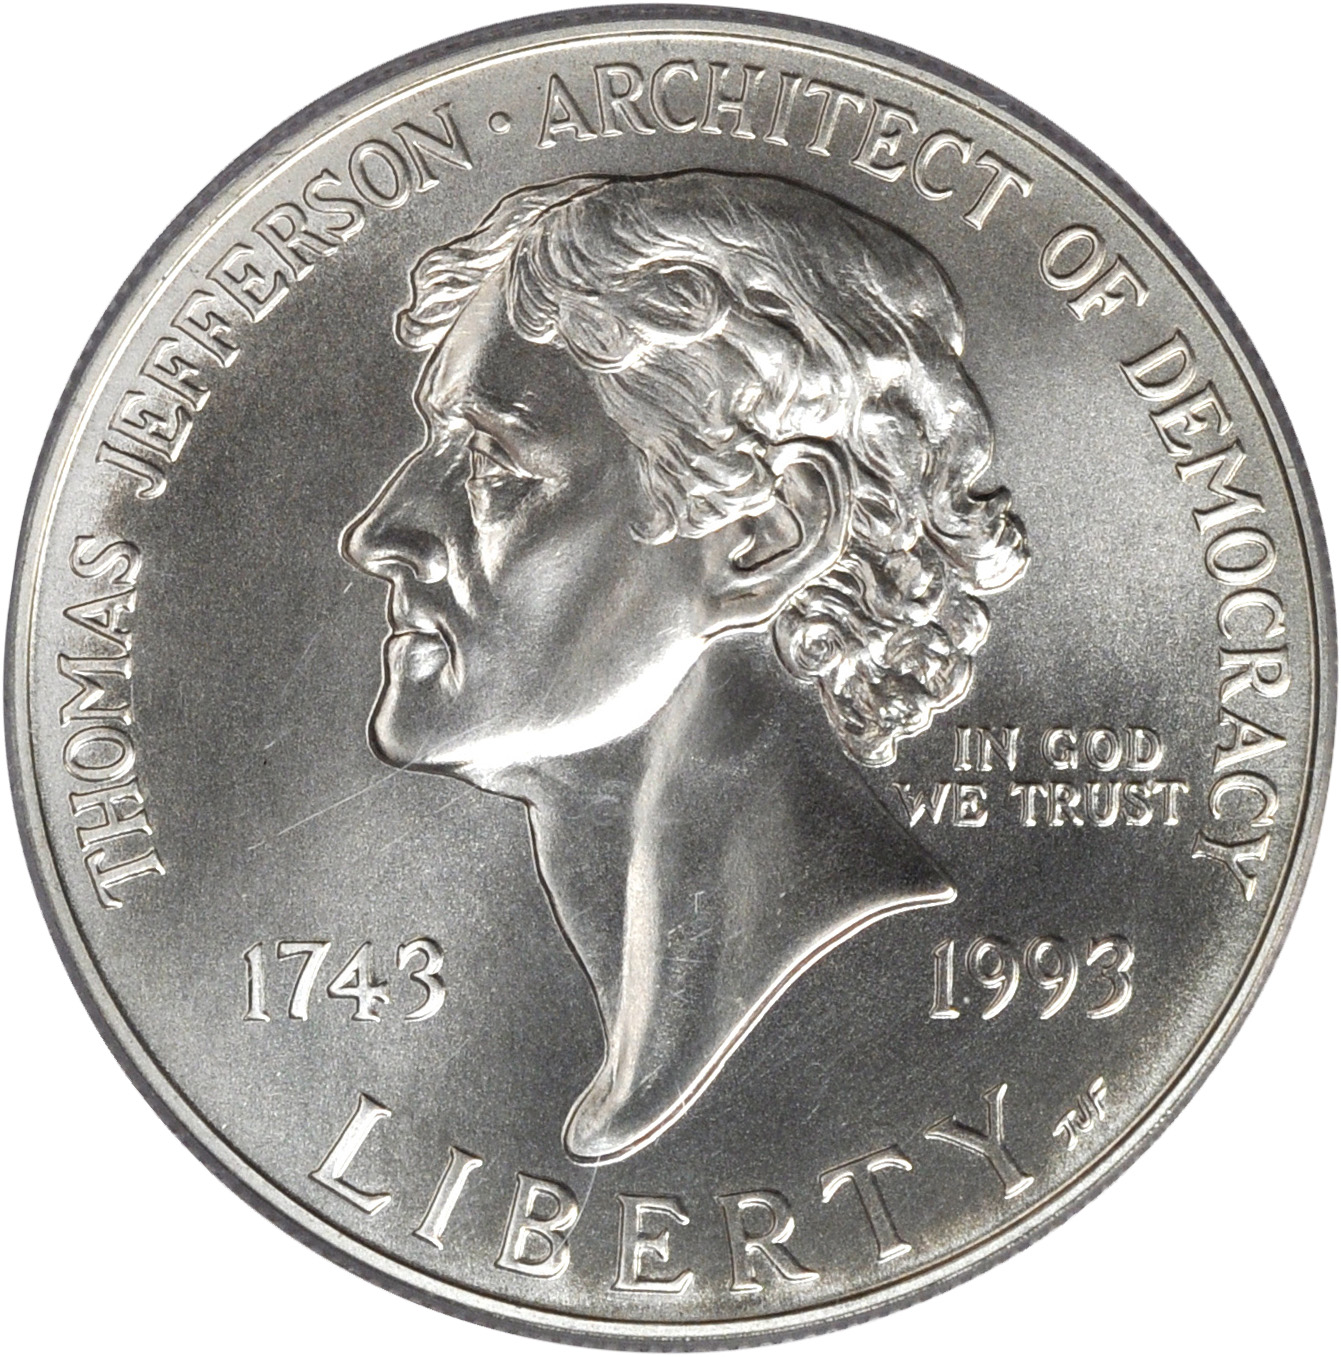 Value of 1993 $1 Jefferson Silver Coin | Sell Silver Coins